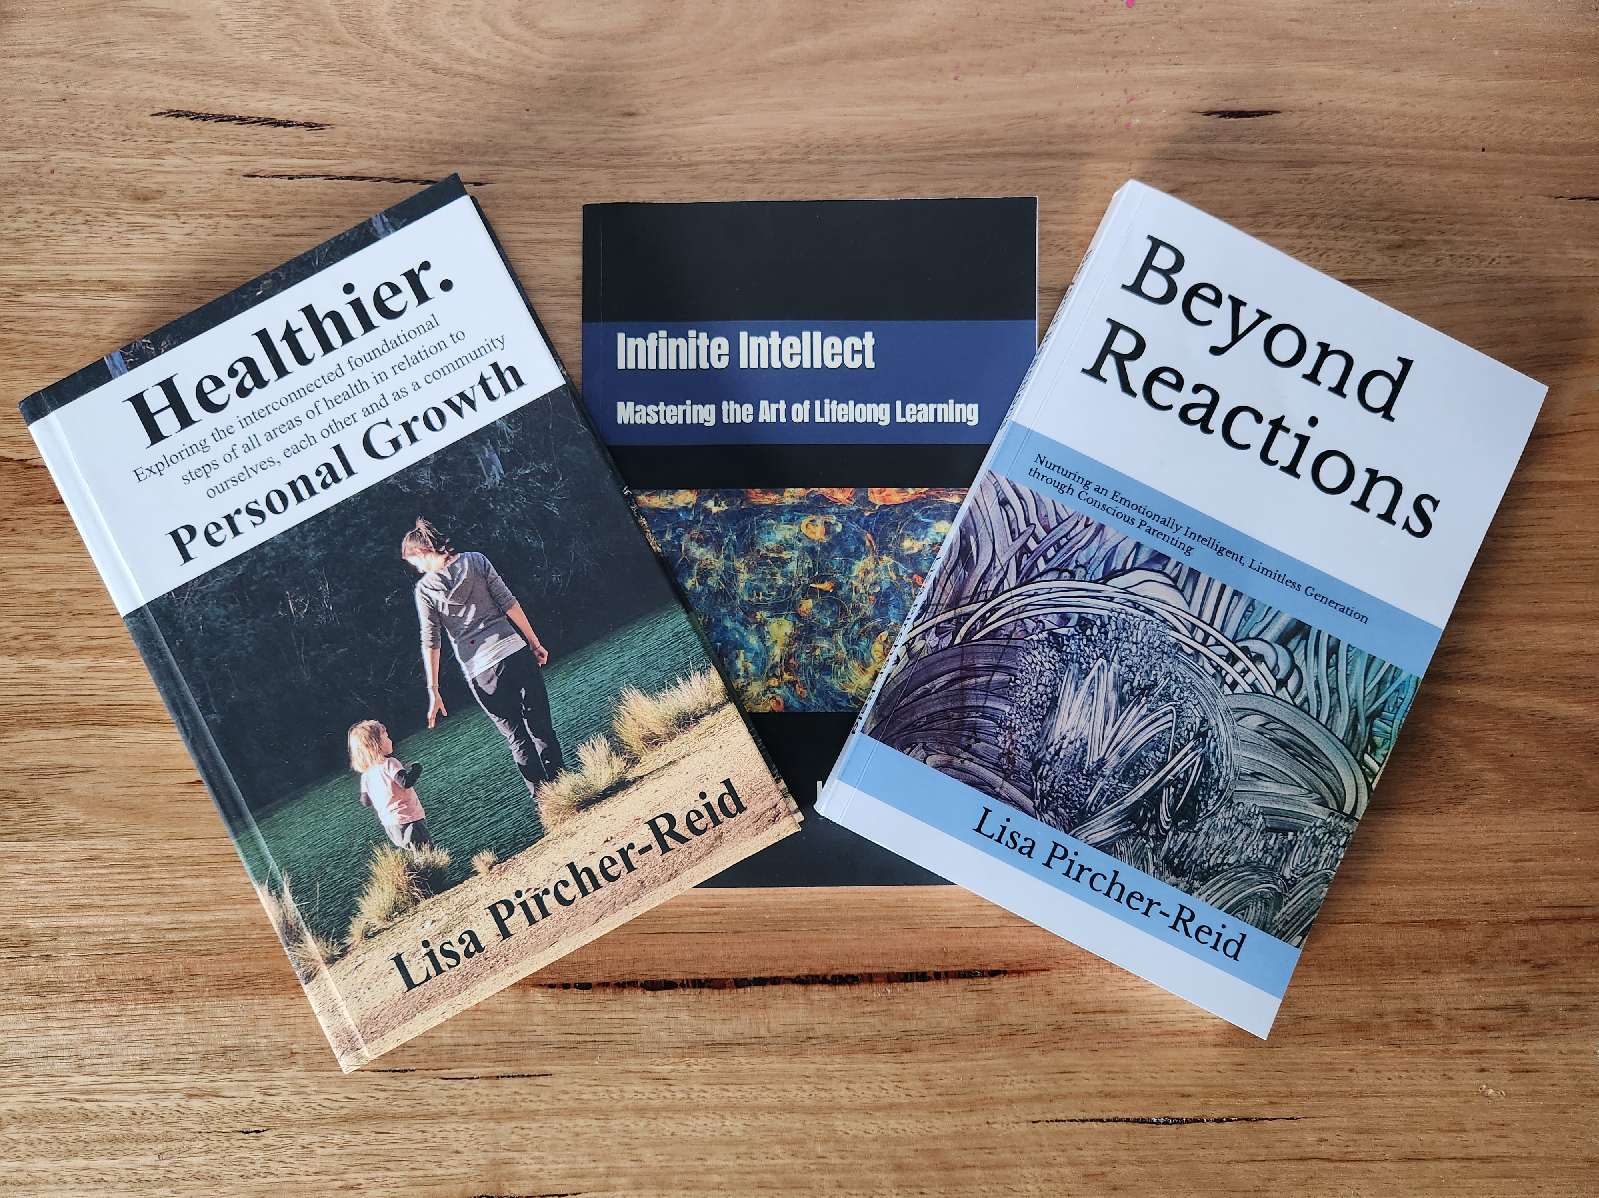 three books on a wooden table with a person leading a child by hand walking behind them on the cover of one book, liminal space, a stock photo, naturalism